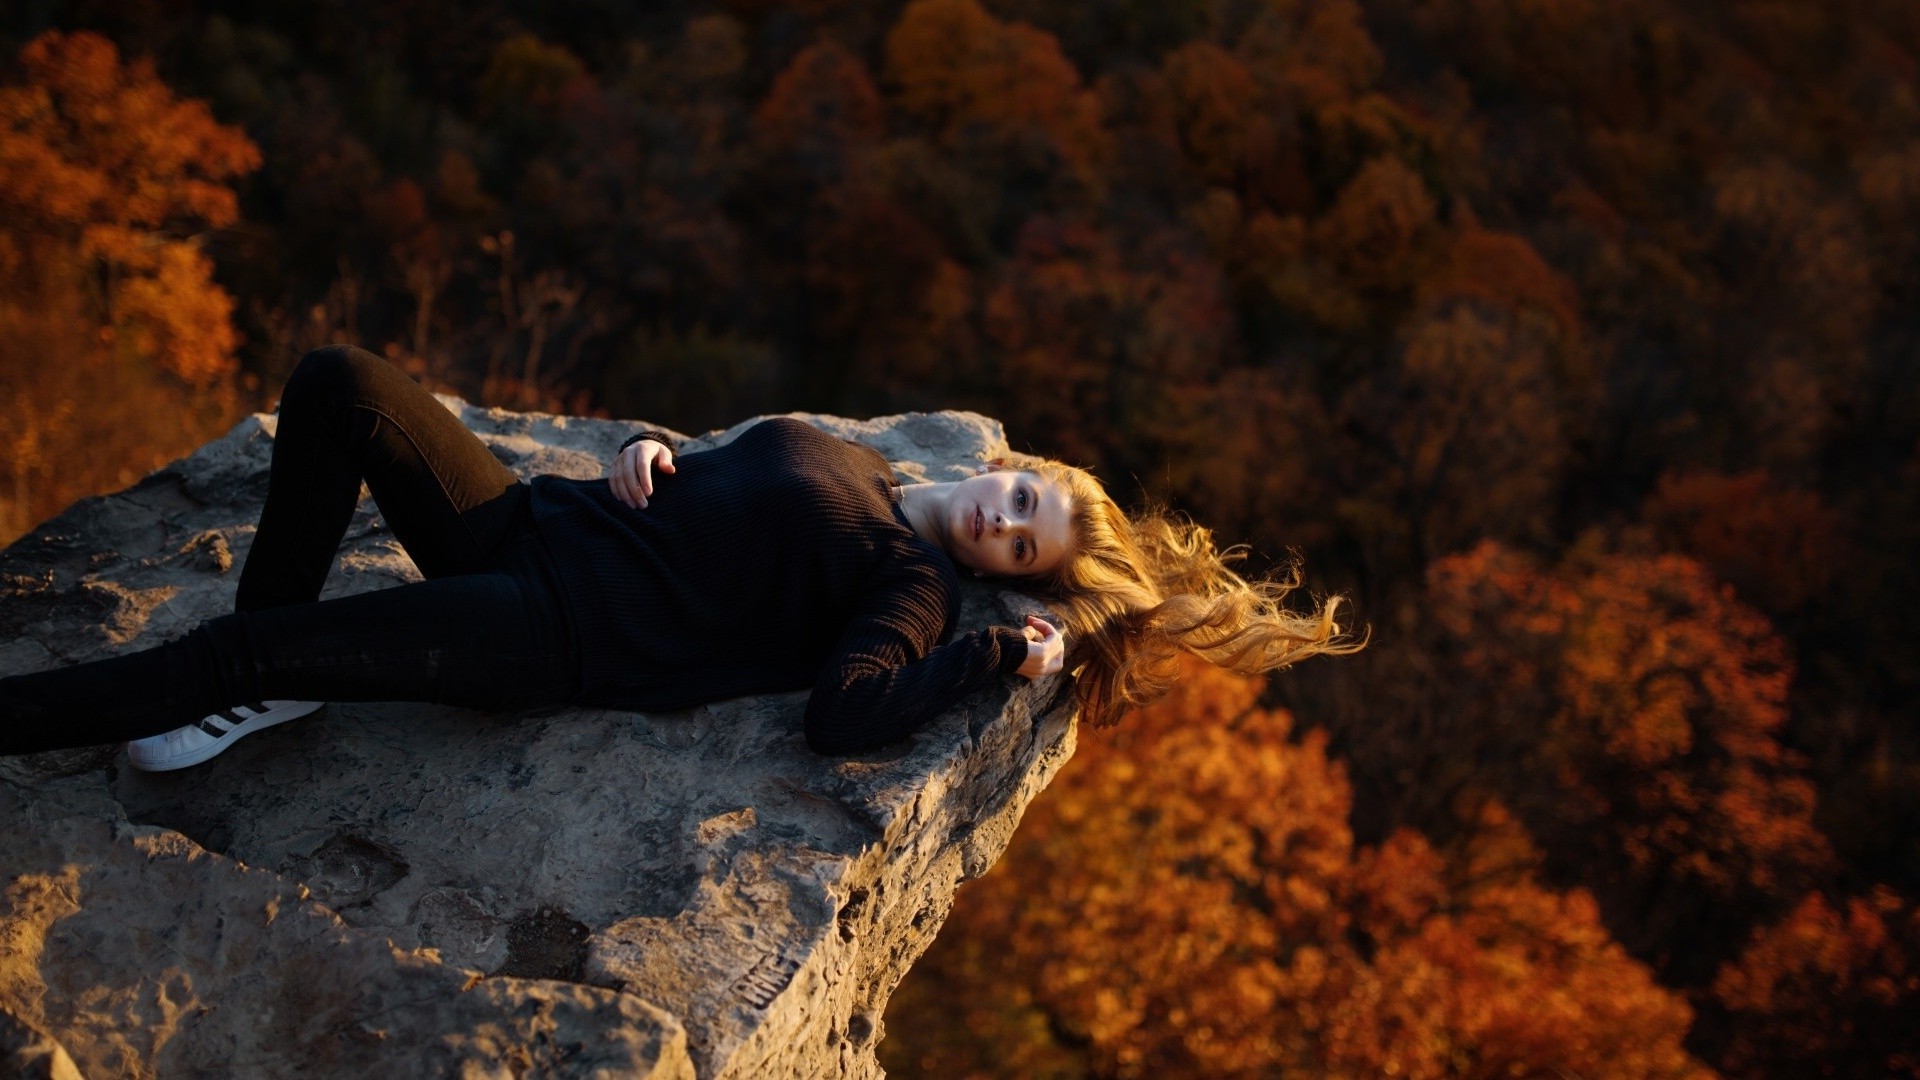 women, Model, Blonde, Long Hair, Women Outdoors, Nature, Trees, Lying On Back, Looking At Viewer, Black Clothing, Open Mouth, Rock, Forest, Windy, Sneakers, Adidas, Skinny Jeans, Fall, Blue Eyes Wallpaper